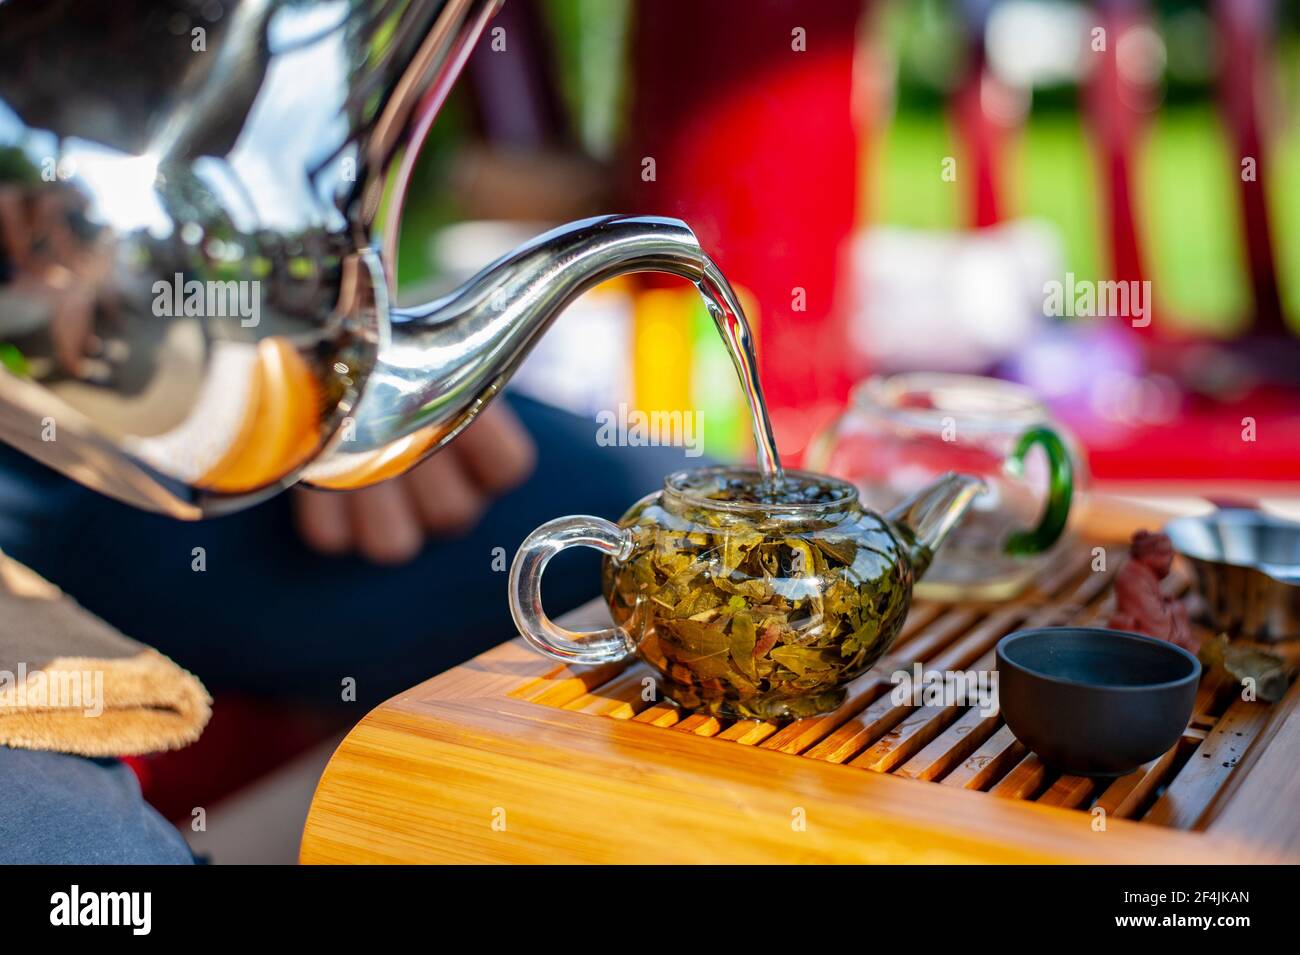 Traditional Chinese tea ceremony. Hot water pouring into a glass teapot with green tea leaves of Chinese oolong tea in it. Stock Photo